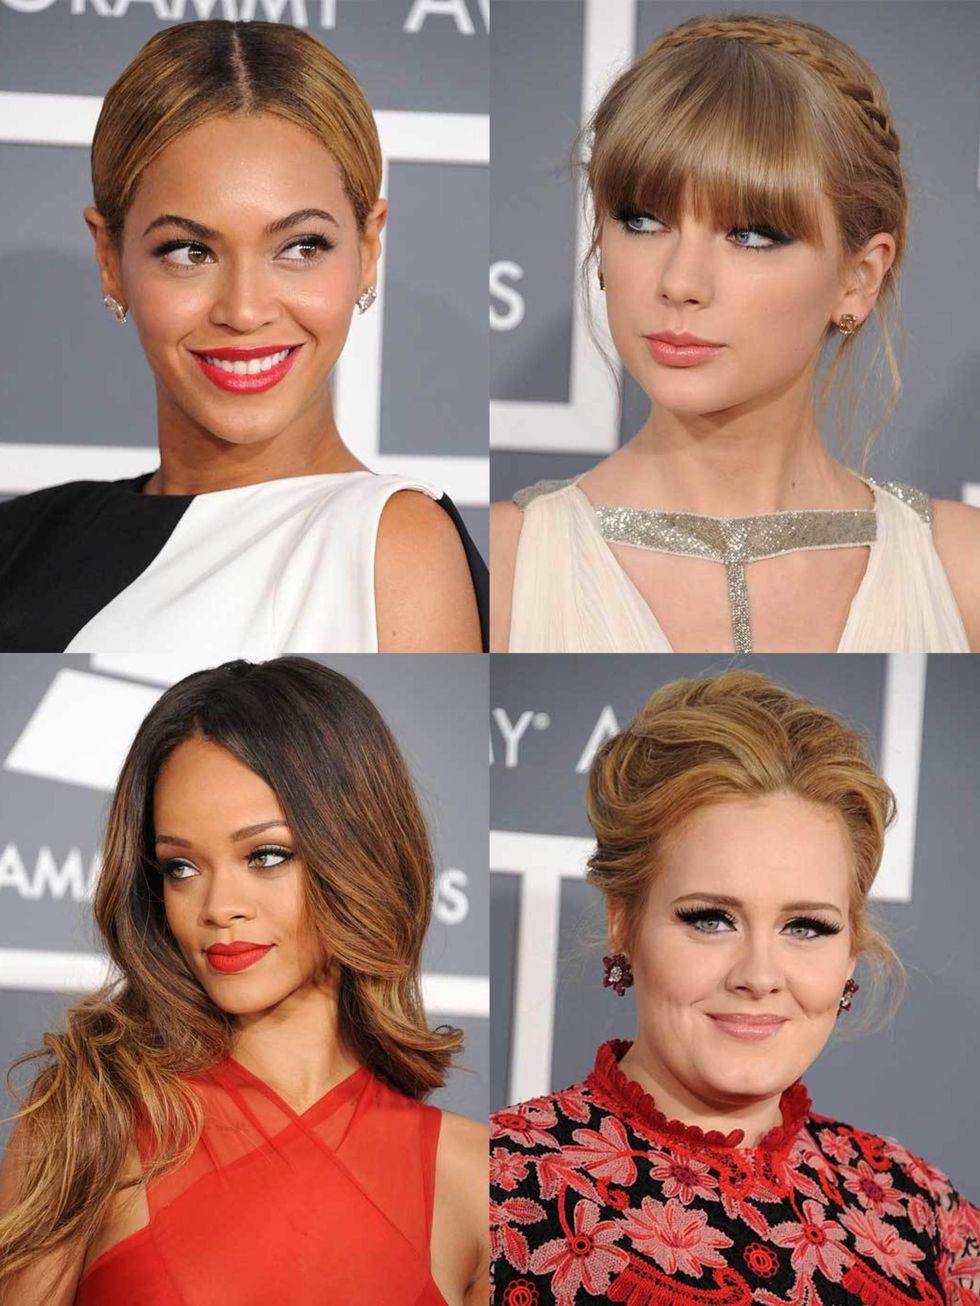 <p>We know its all about the music, but us being us, we're equally enamoured with the red carpet grooming. The <a href="http://www.elleuk.com/fashion/news/grammys-2013-winners-highlights">2013 Grammys</a> didn't disappoint with a strong leaning towards bl